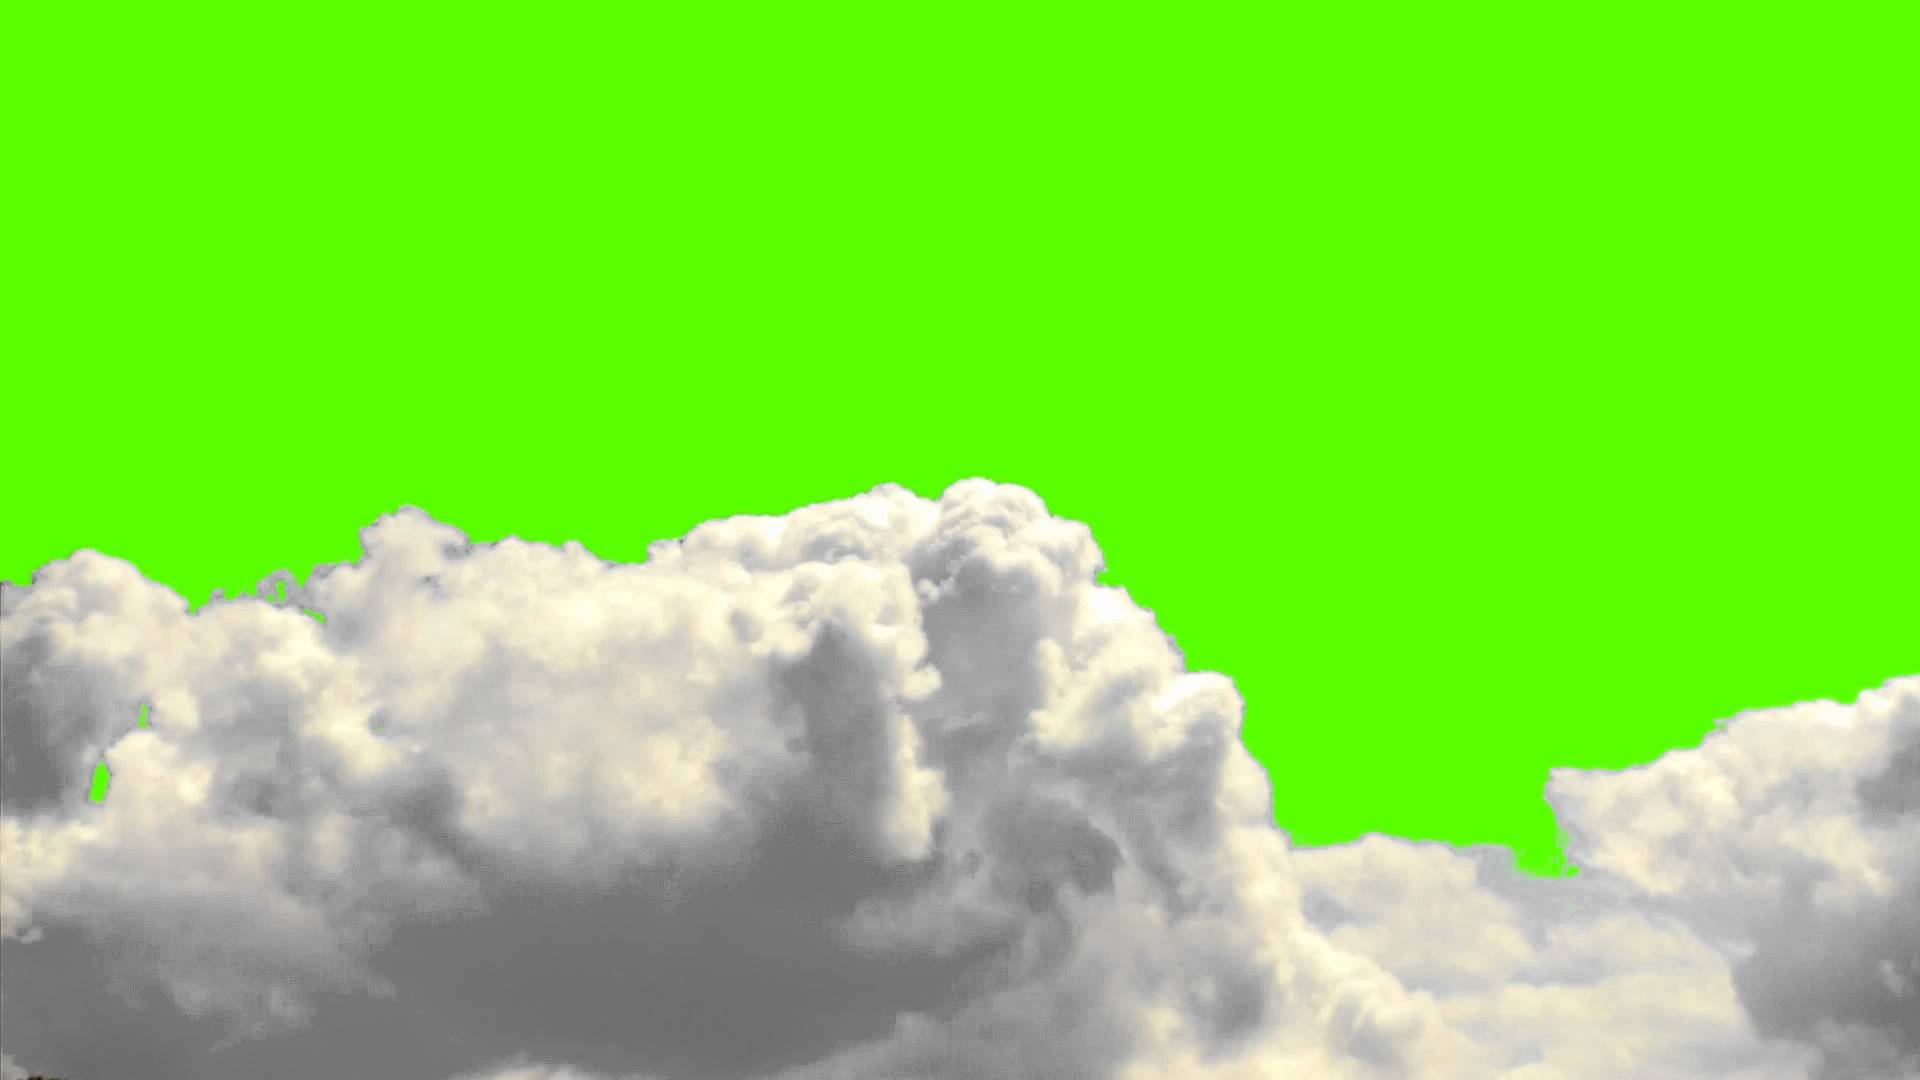 Free Green Screen Backgrounds - Wallpaper Cave